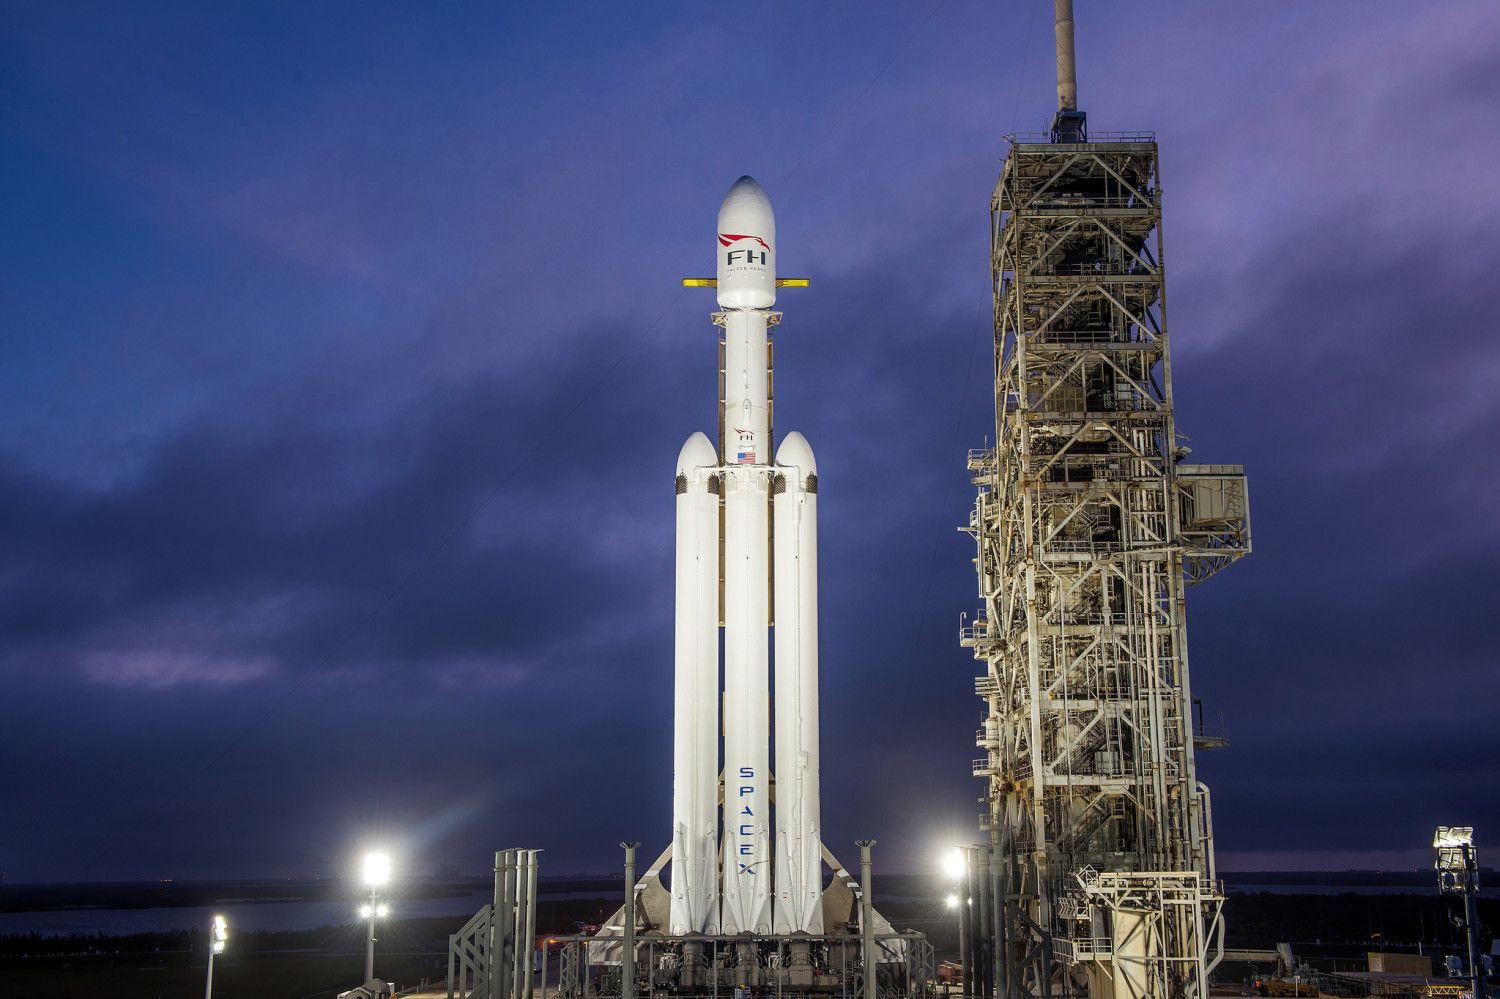 Verical SpaceX Falcon Heavy Logo - SpaceX shows off its Falcon Heavy rocket vertical on the launchpad